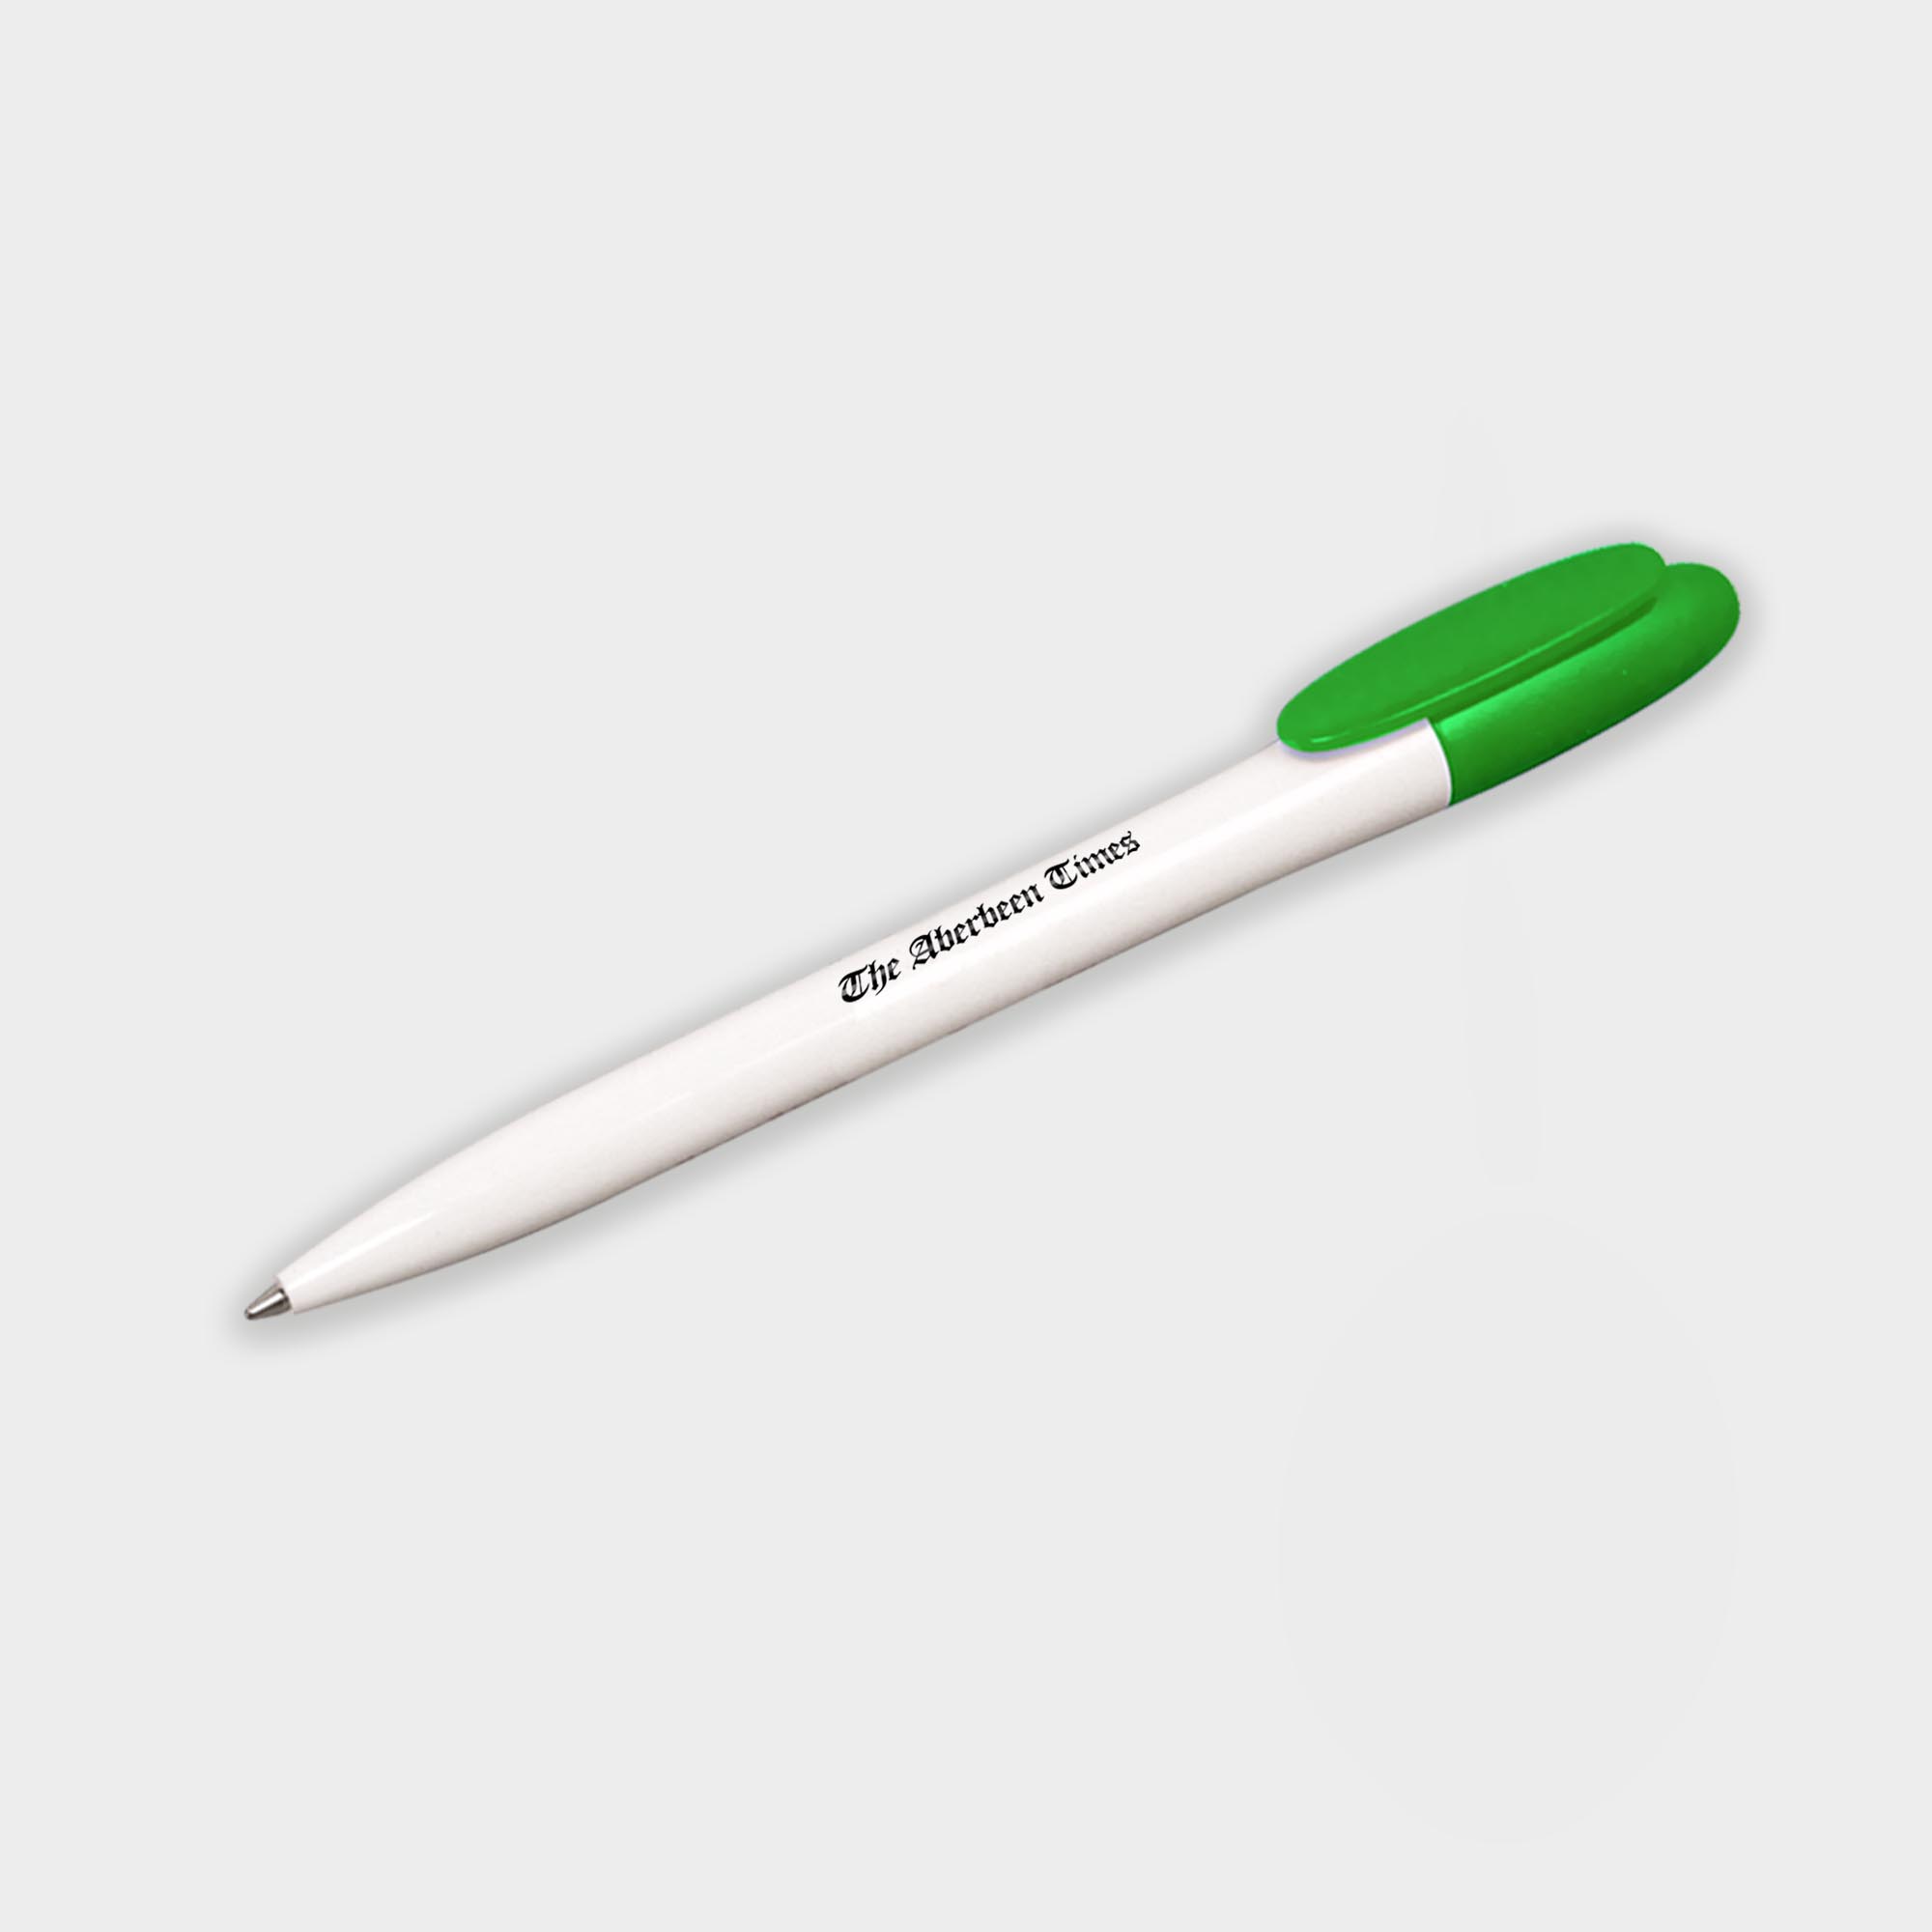 The Green & Good Realta ballpen. It is made in the EU from recycled plastic. Available in a variety of colours with a twist action mechanism. Comes with black ink as standard. One of our bestsellers. White / Green